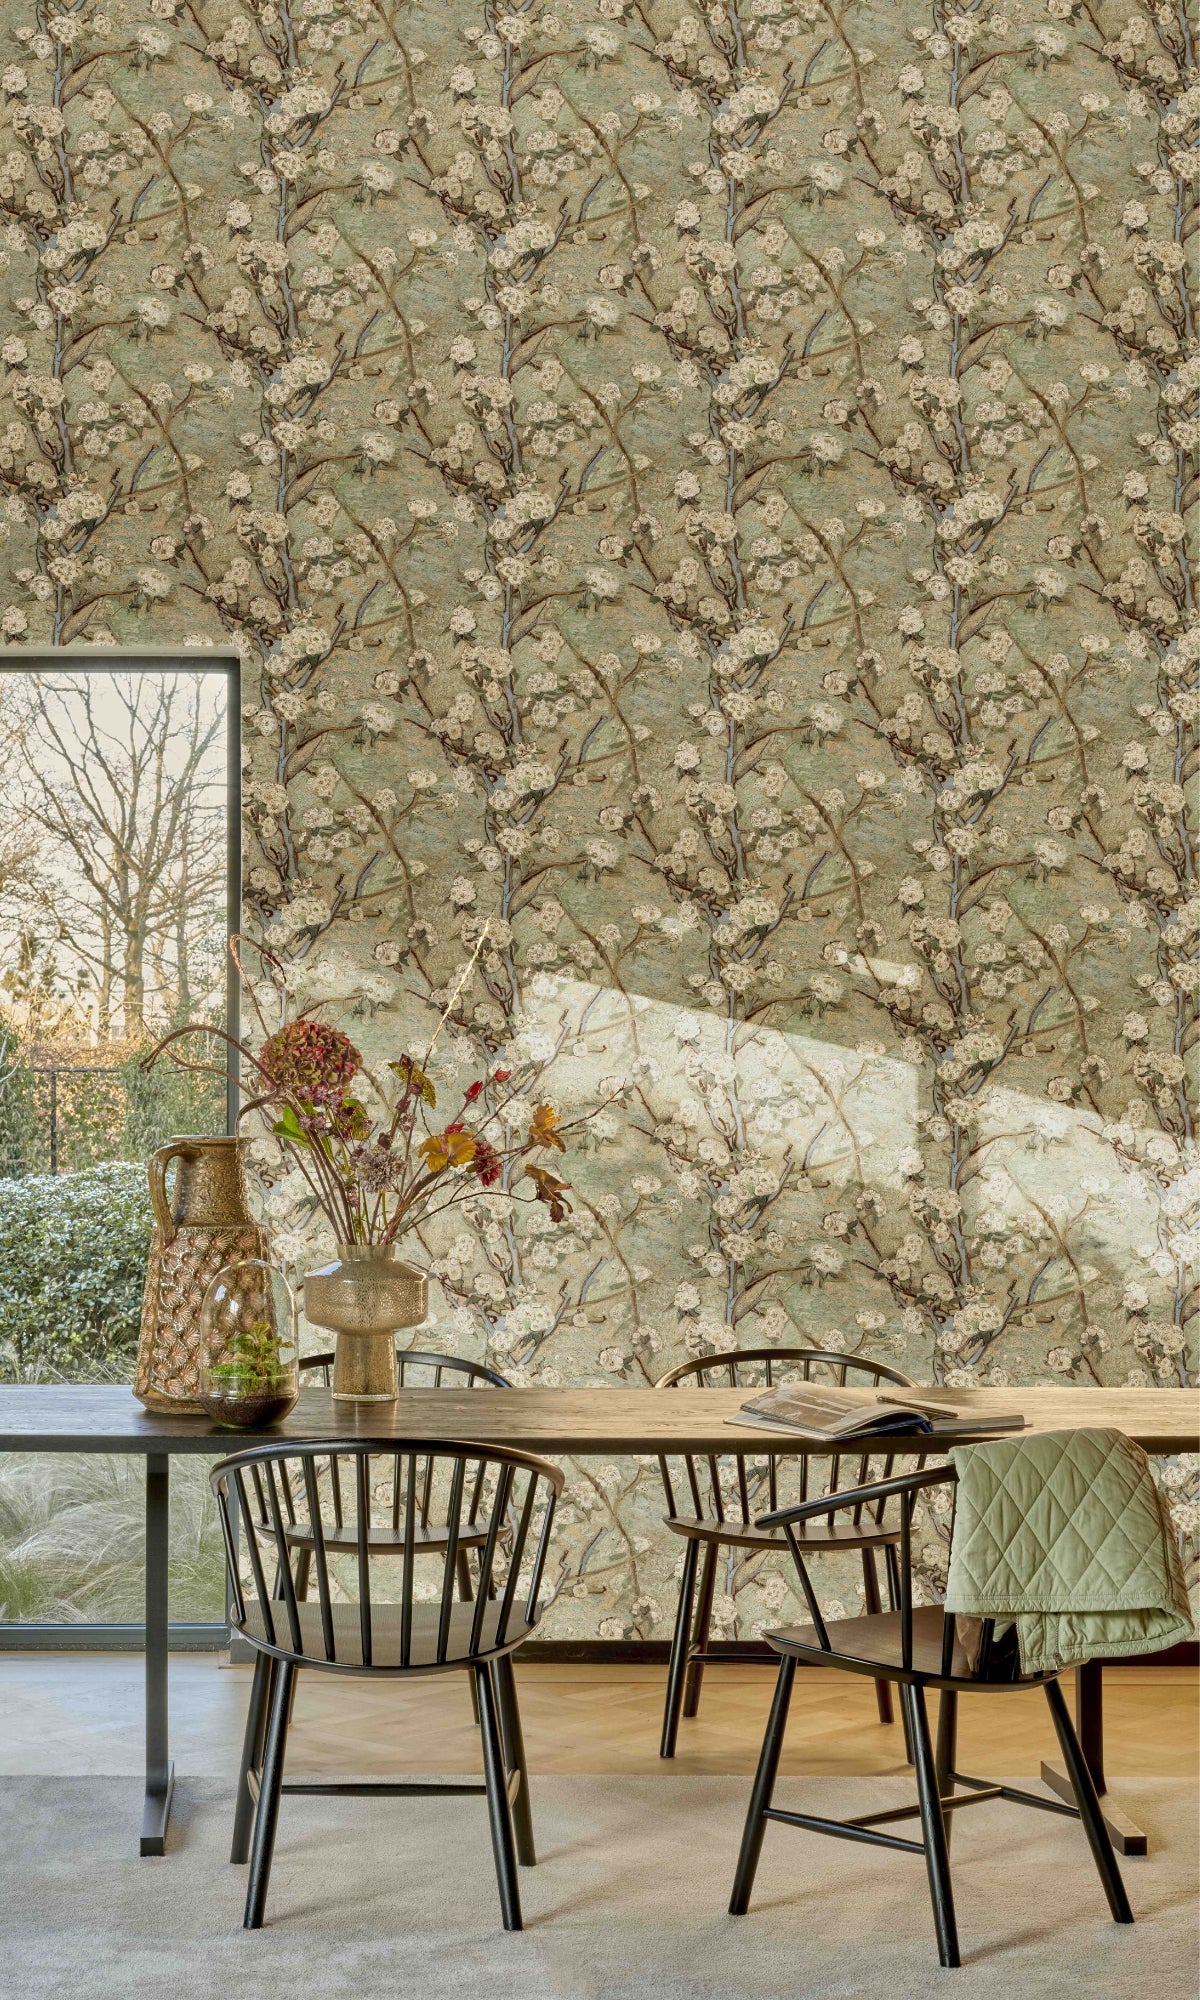 Beige & Green Blossoming Pear Tree Tropical Wallpaper R8477